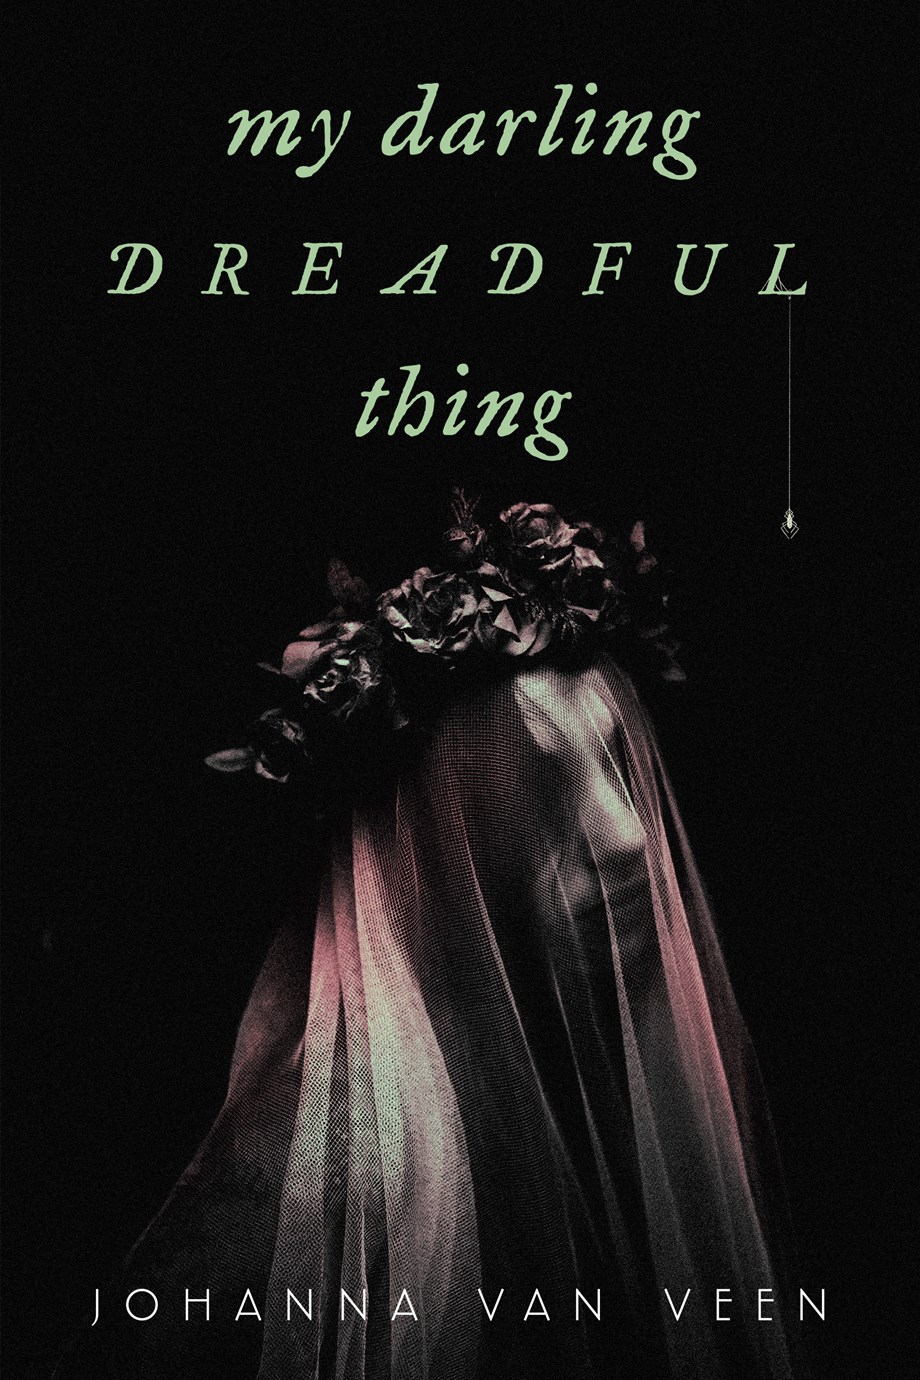 Book Review: My Darling Dreadful Thing by Johanna van Veen (gothic)